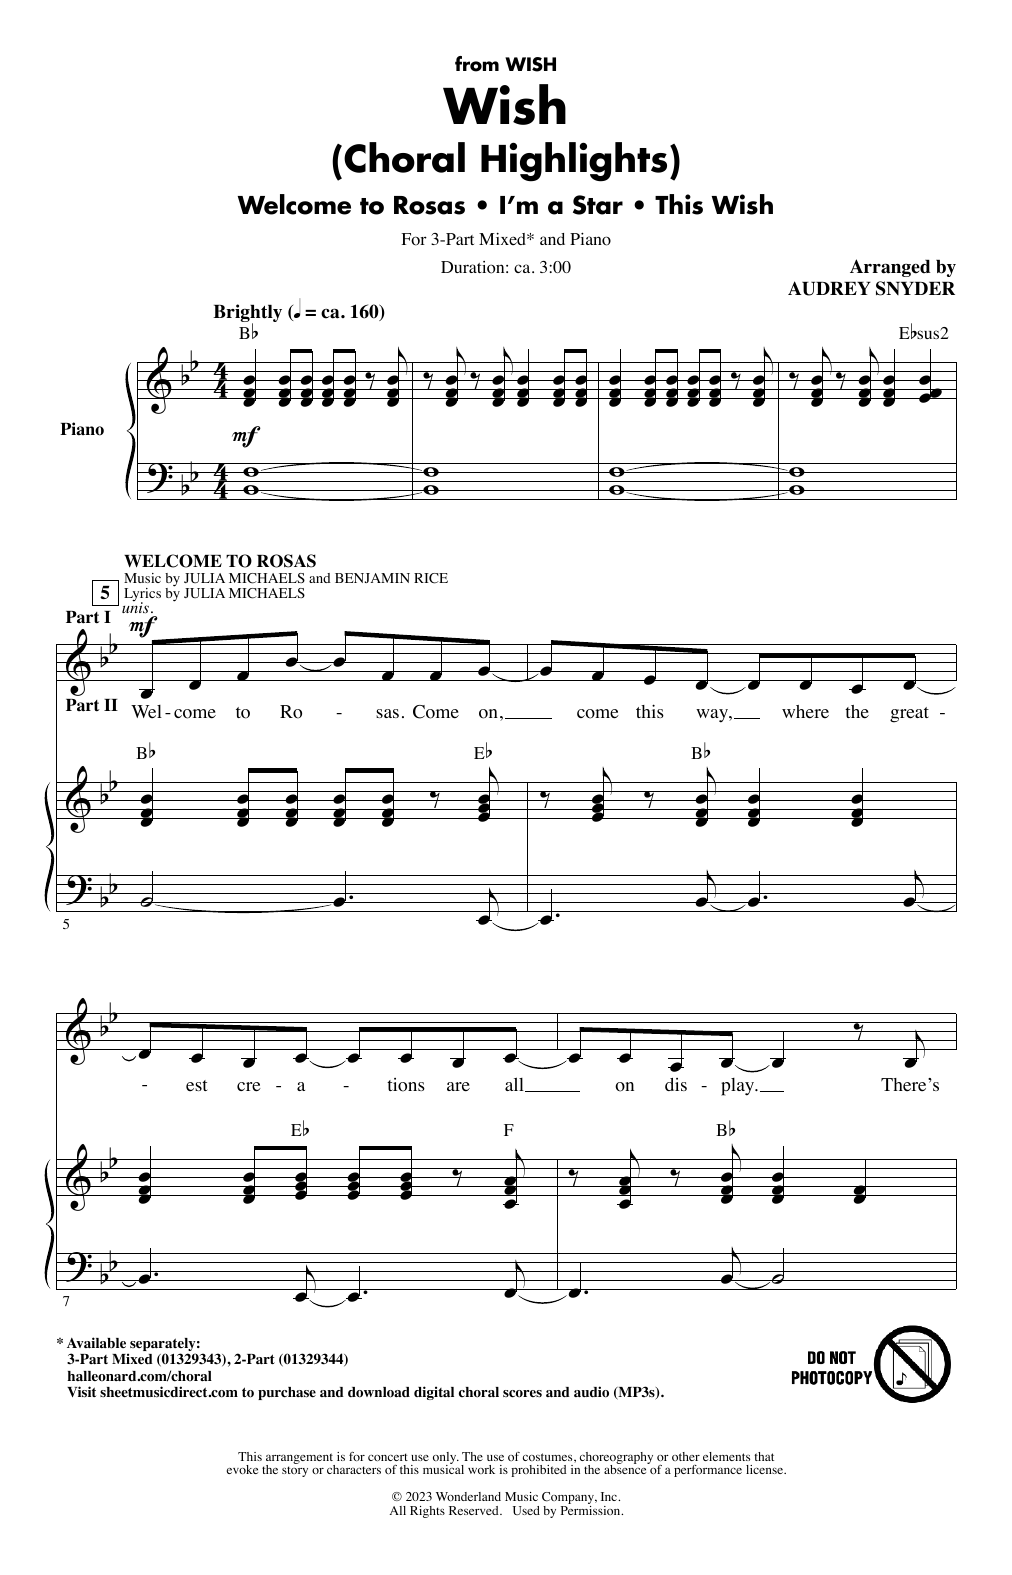 Audrey Snyder Wish (Choral Highlights) sheet music notes printable PDF score